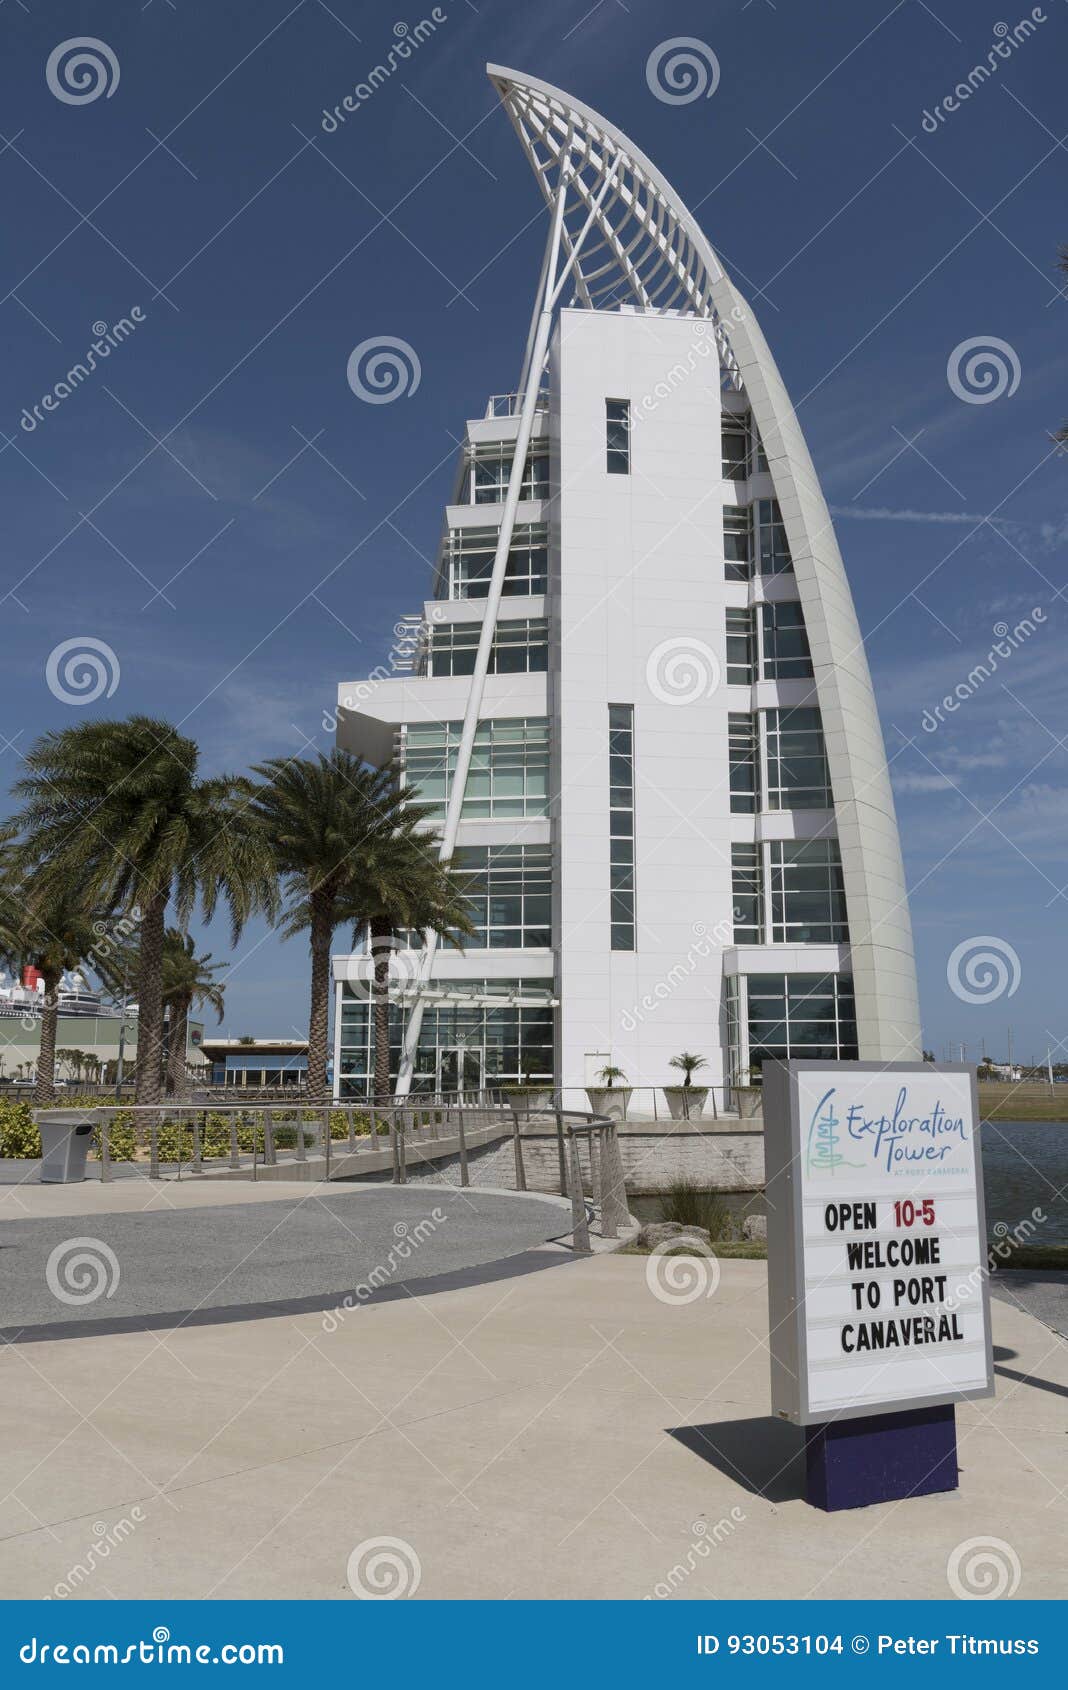 Exploration Tower at Port Canaveral Florida USA Editorial Stock Image